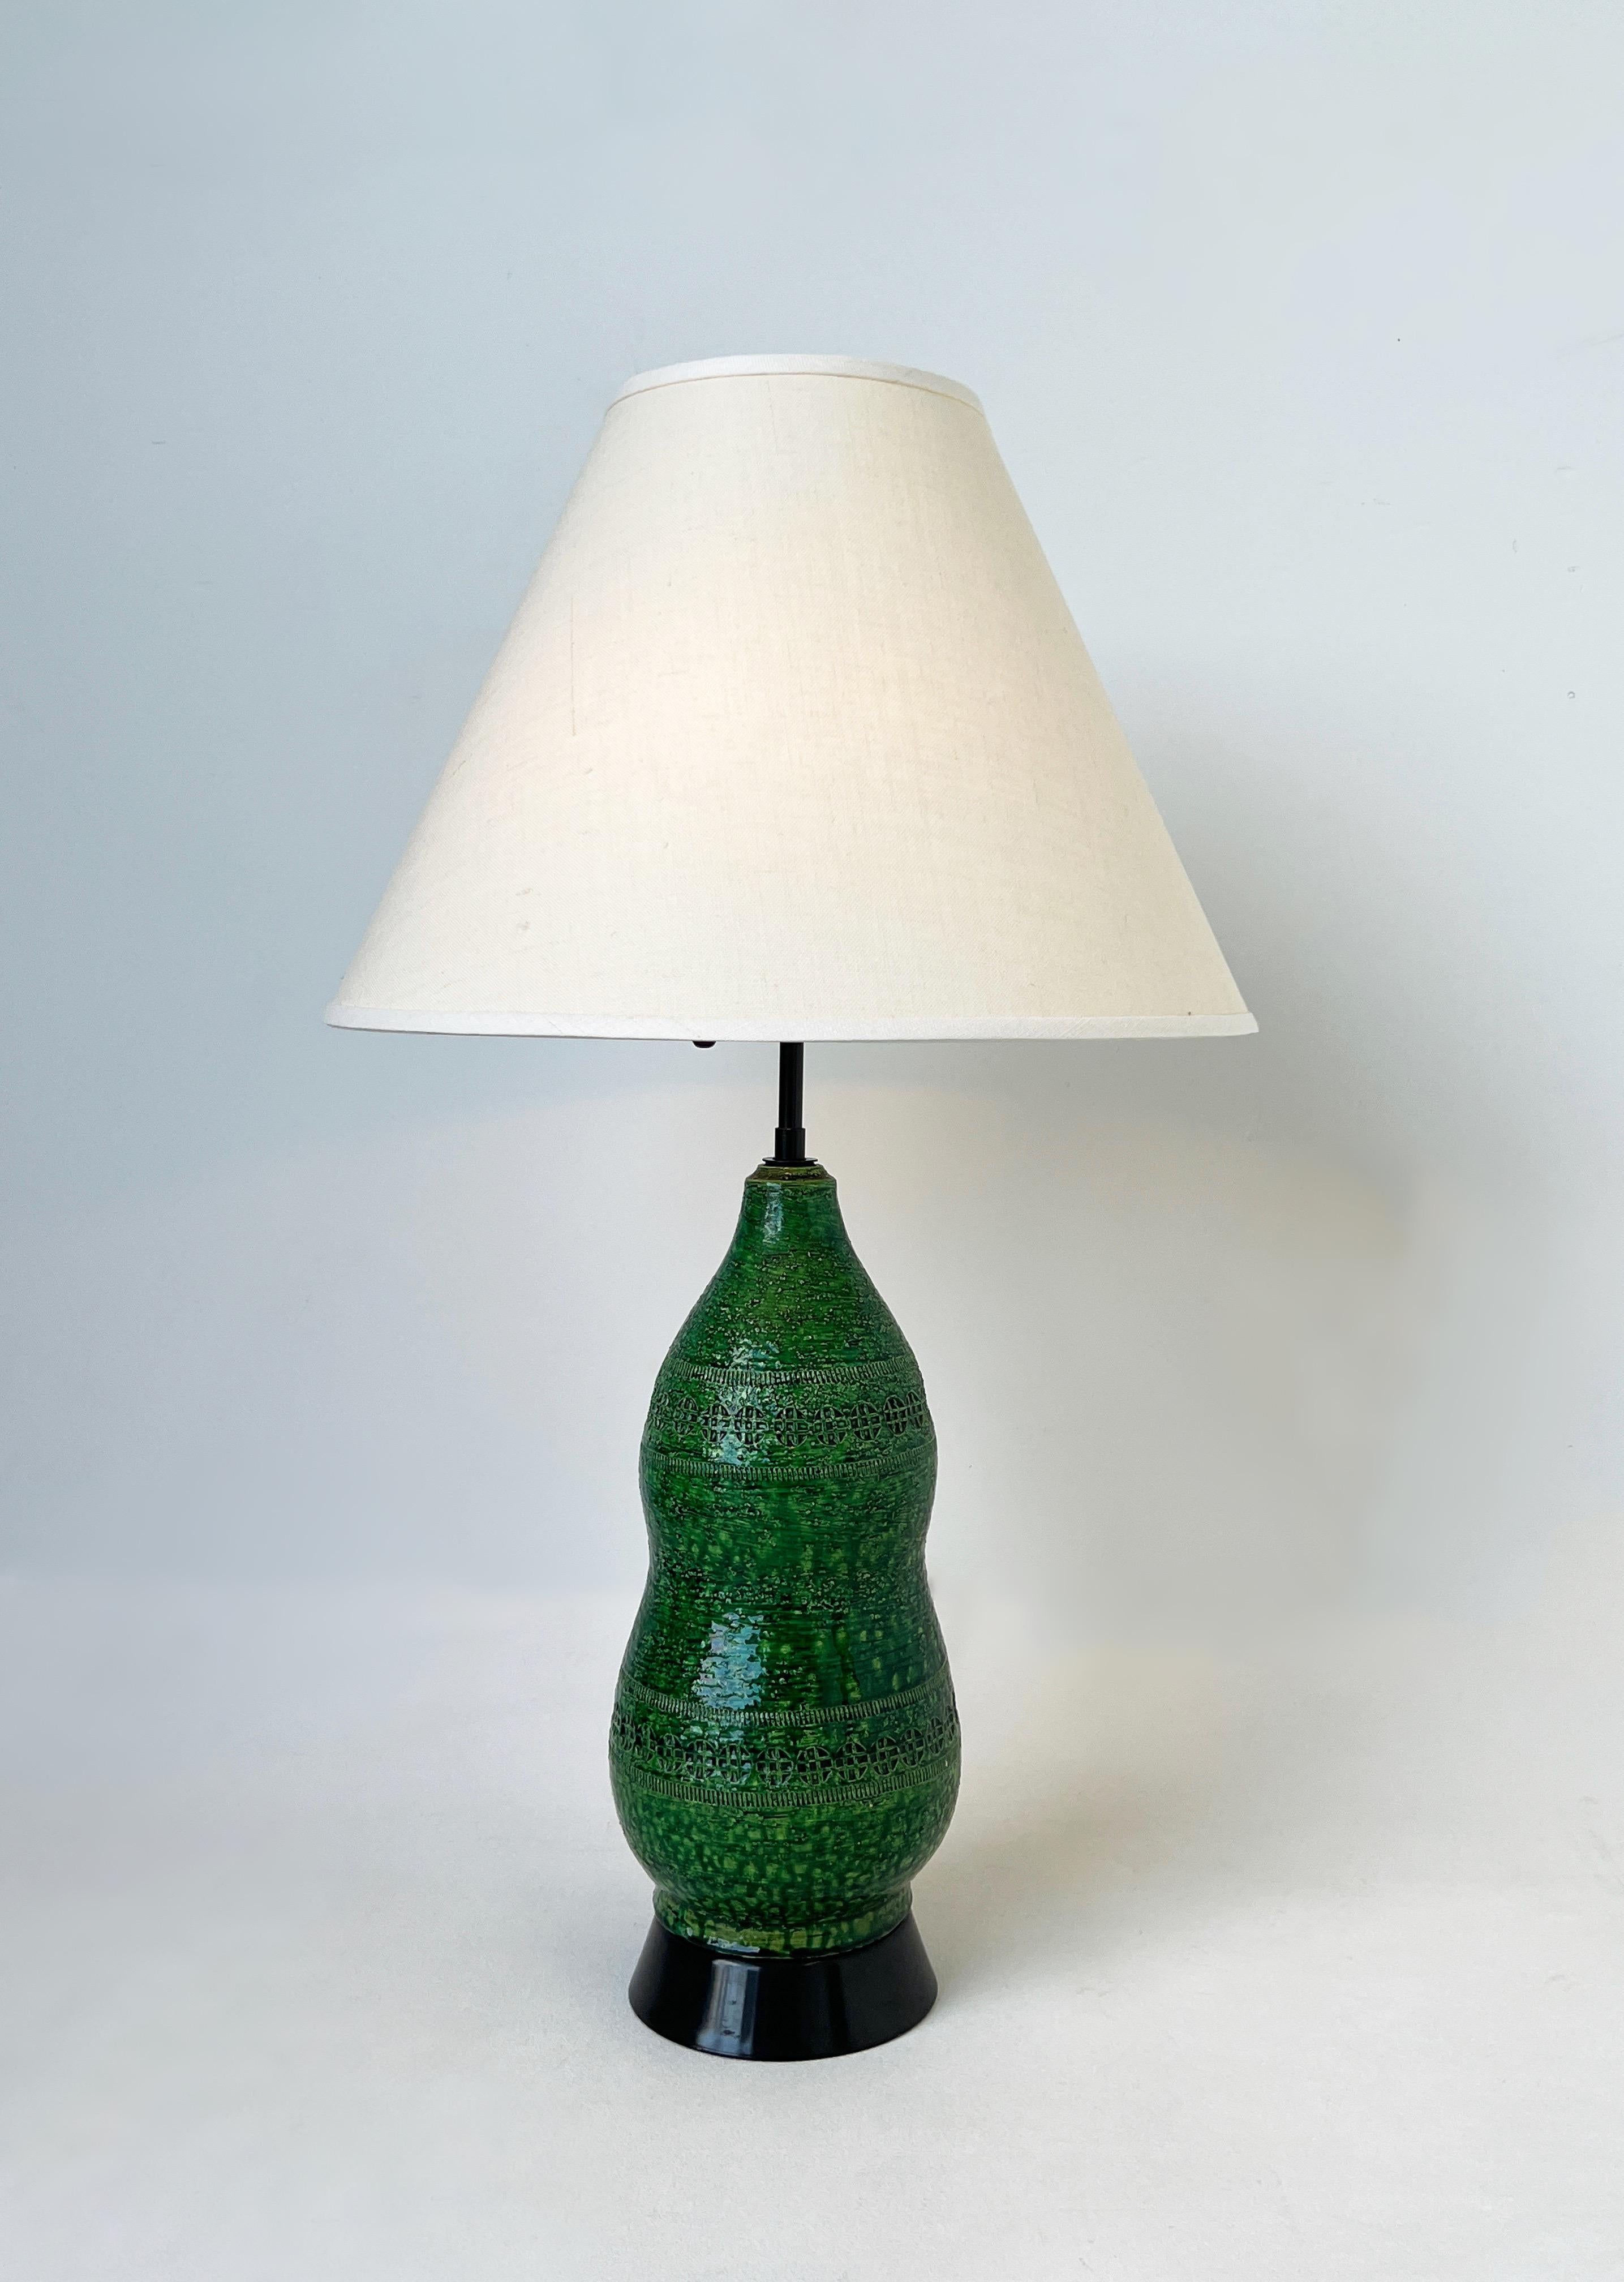 1970’s Italian green ceramic and black lacquered table lamp, design by Bitossi. 
Newly rewired with new hardware and vanilla linen shade. 
It takes two regular Edison 75w max bulbs. 
Measurements with shade: 18” diameter, 30” high, 7” diameter